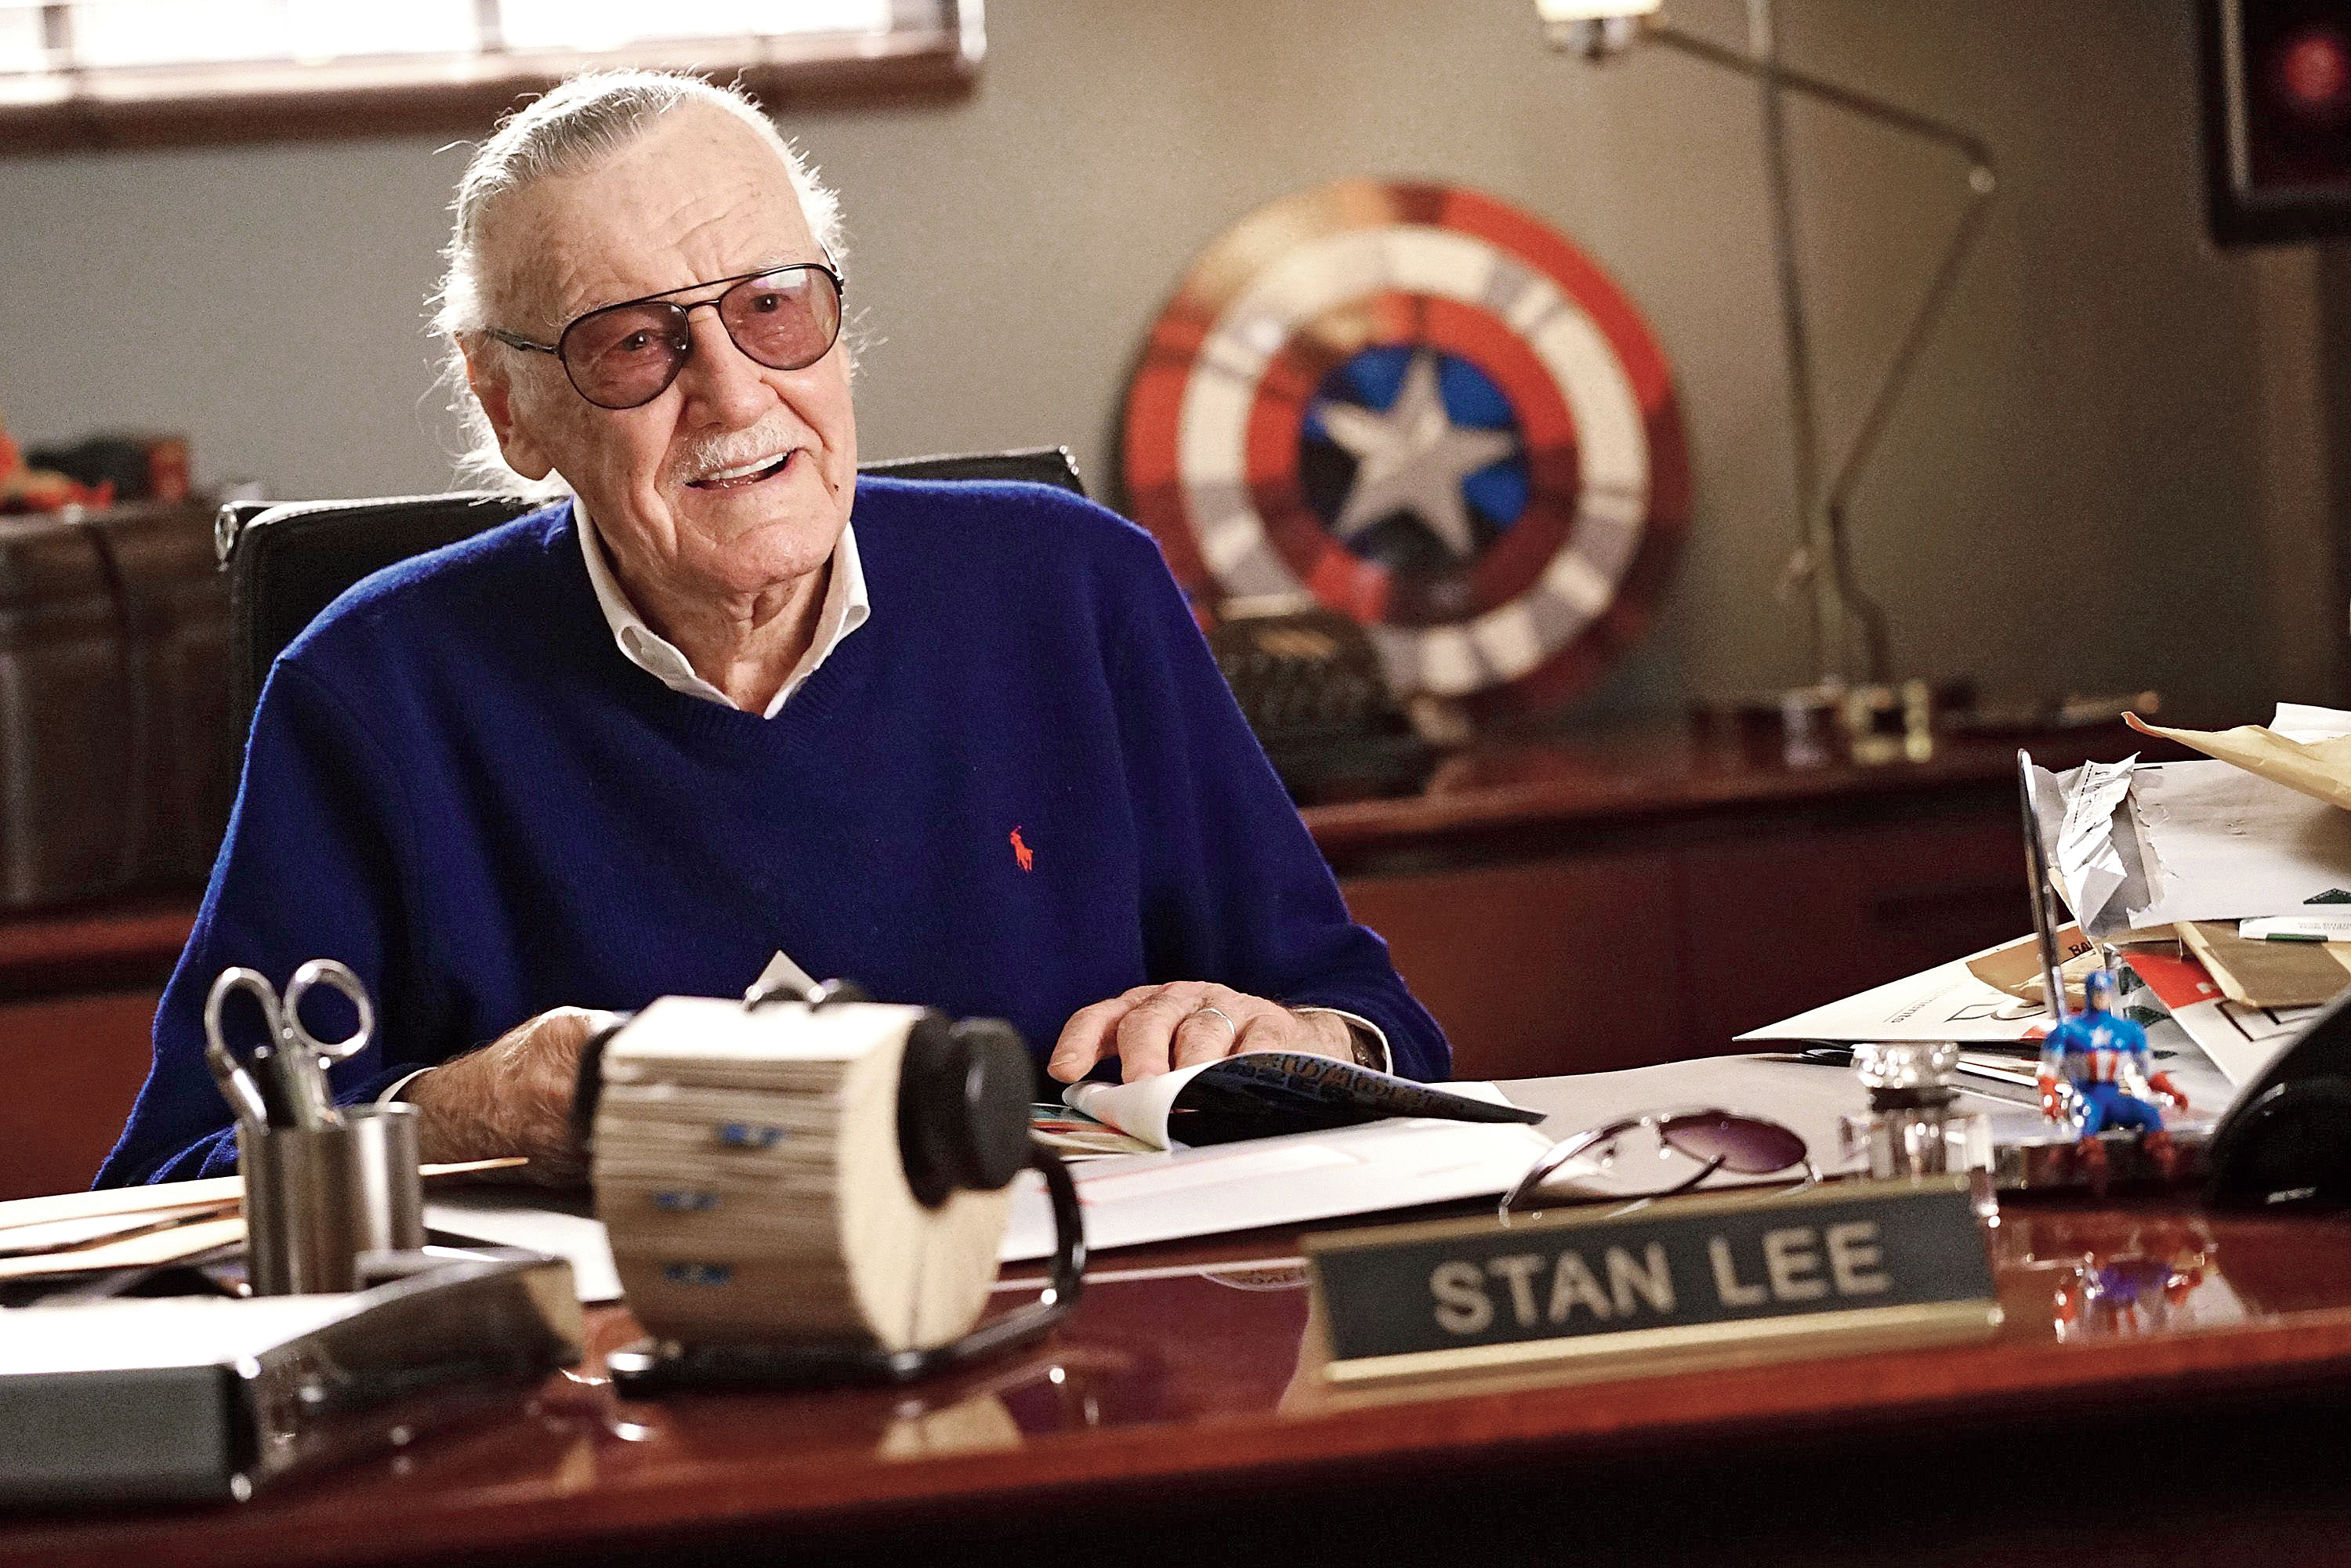 Stan Lee died in Los Angeles on Monday at 95